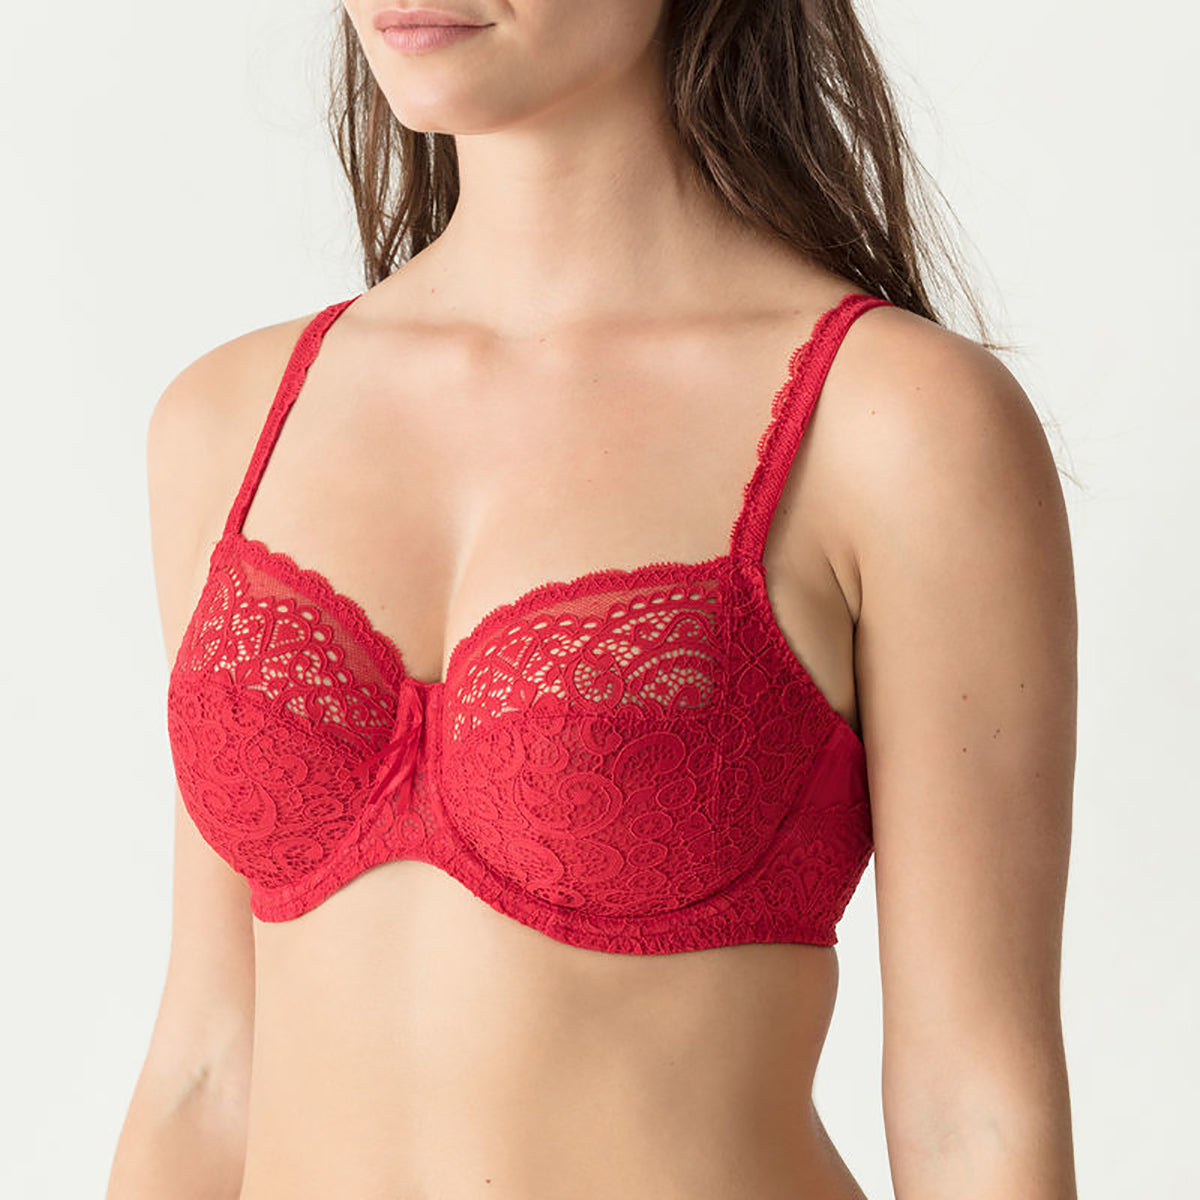 PrimaDonna Twist I Do Full Cup Bra 014-1602/03 in scarlet red side view on model